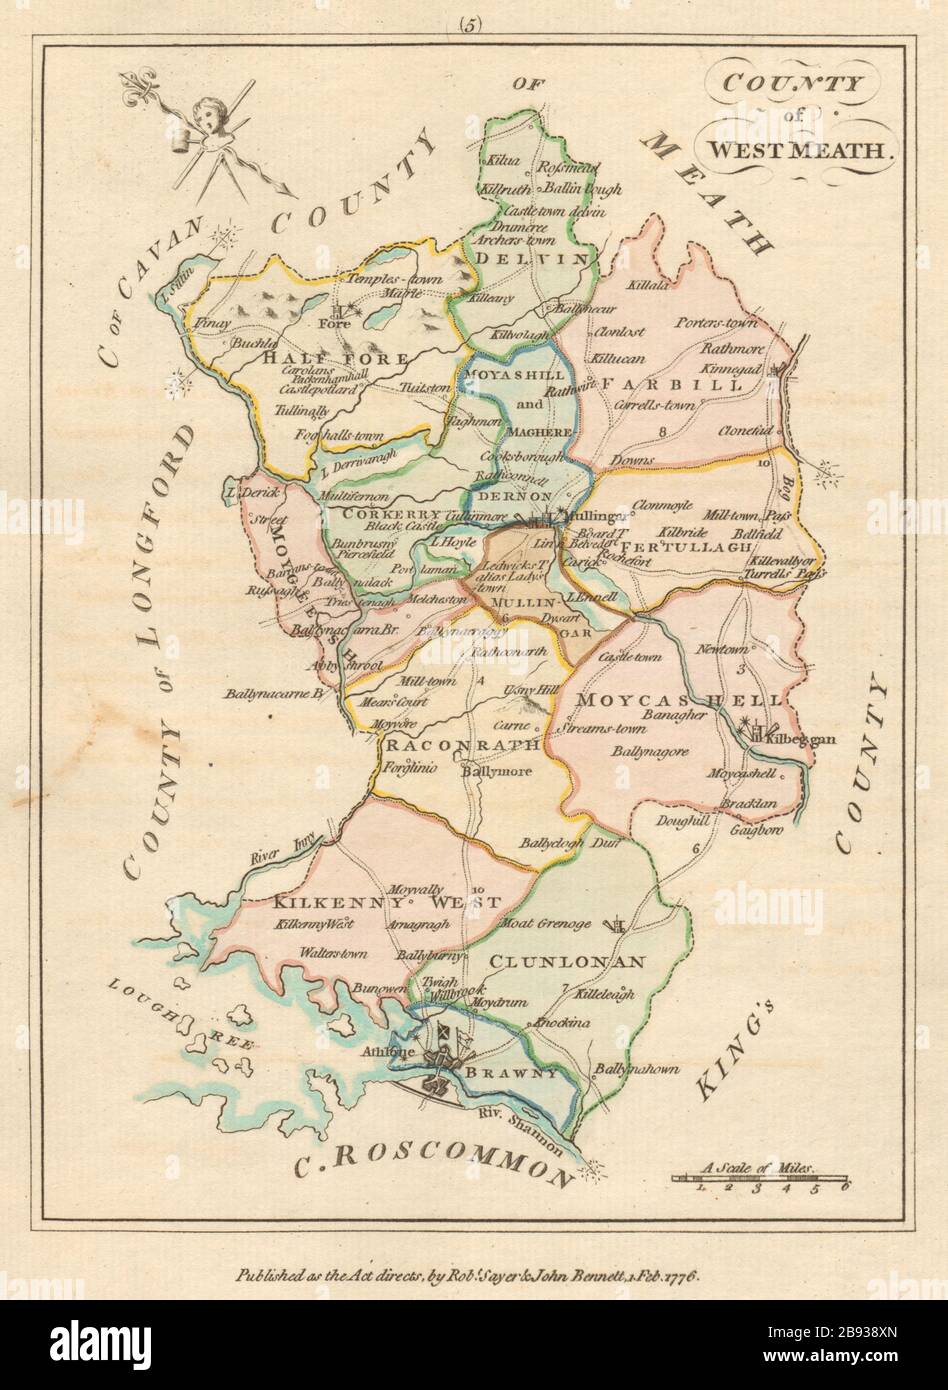 County of West Meath, Leinster. Antique copperplate map. Scalé / Sayer 1776 Stock Photo